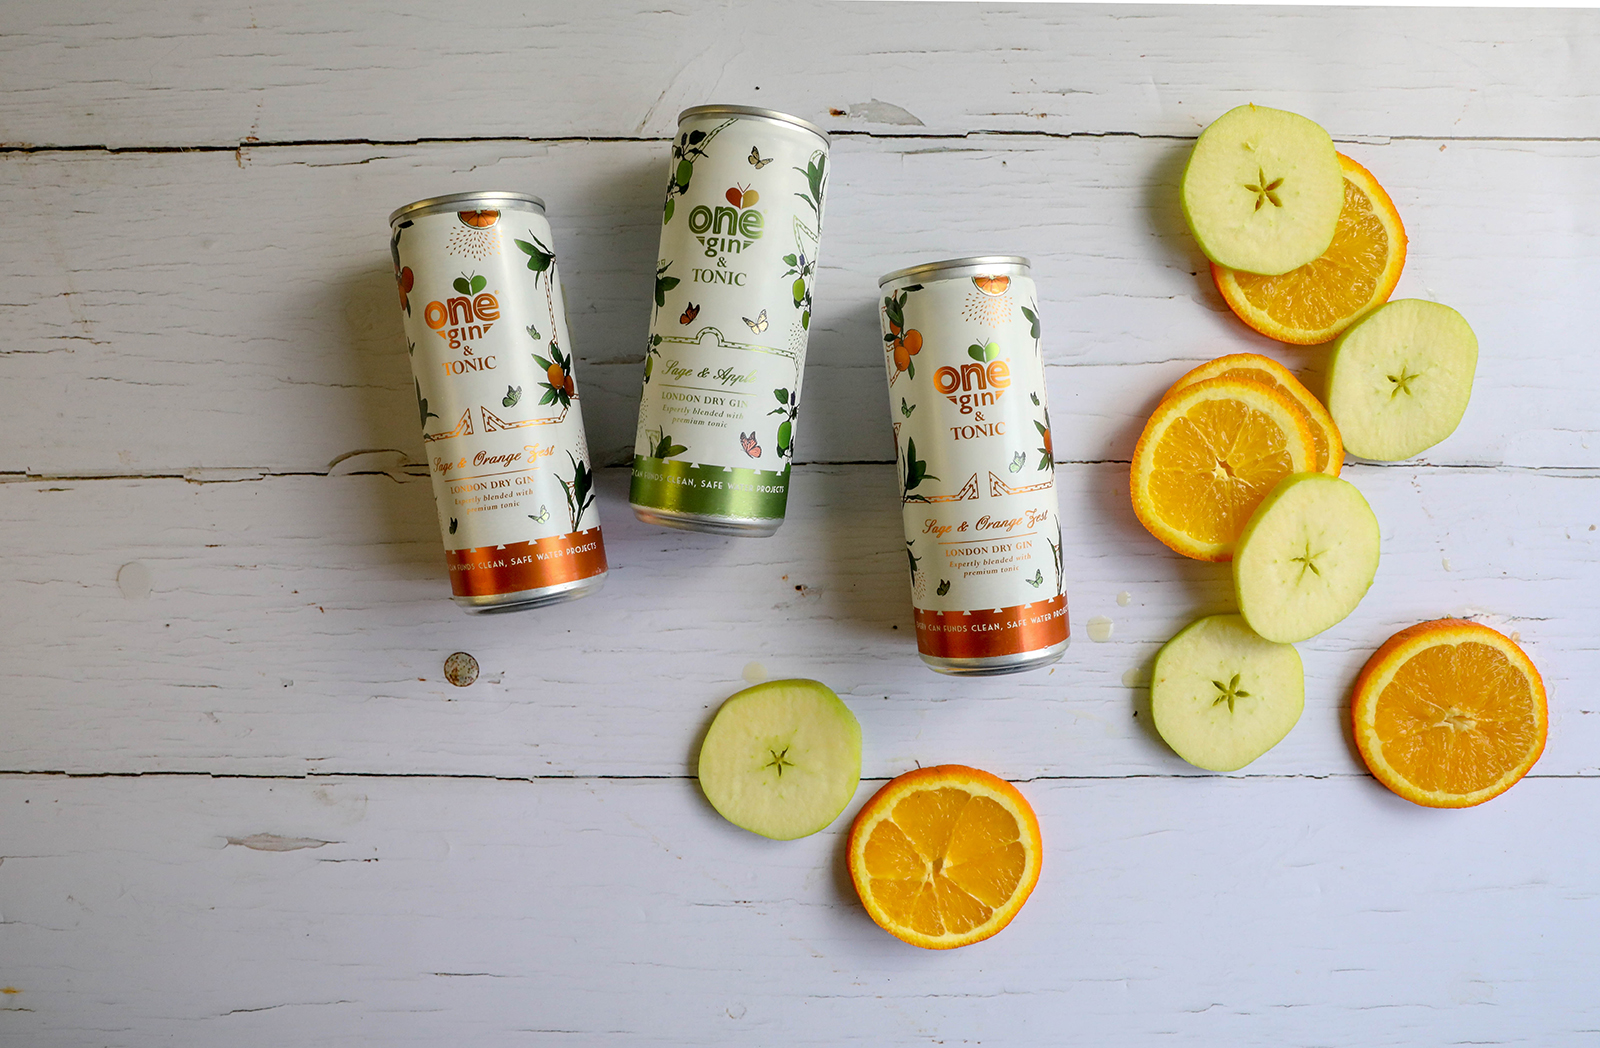 One Gin ready-to-drink gin cans